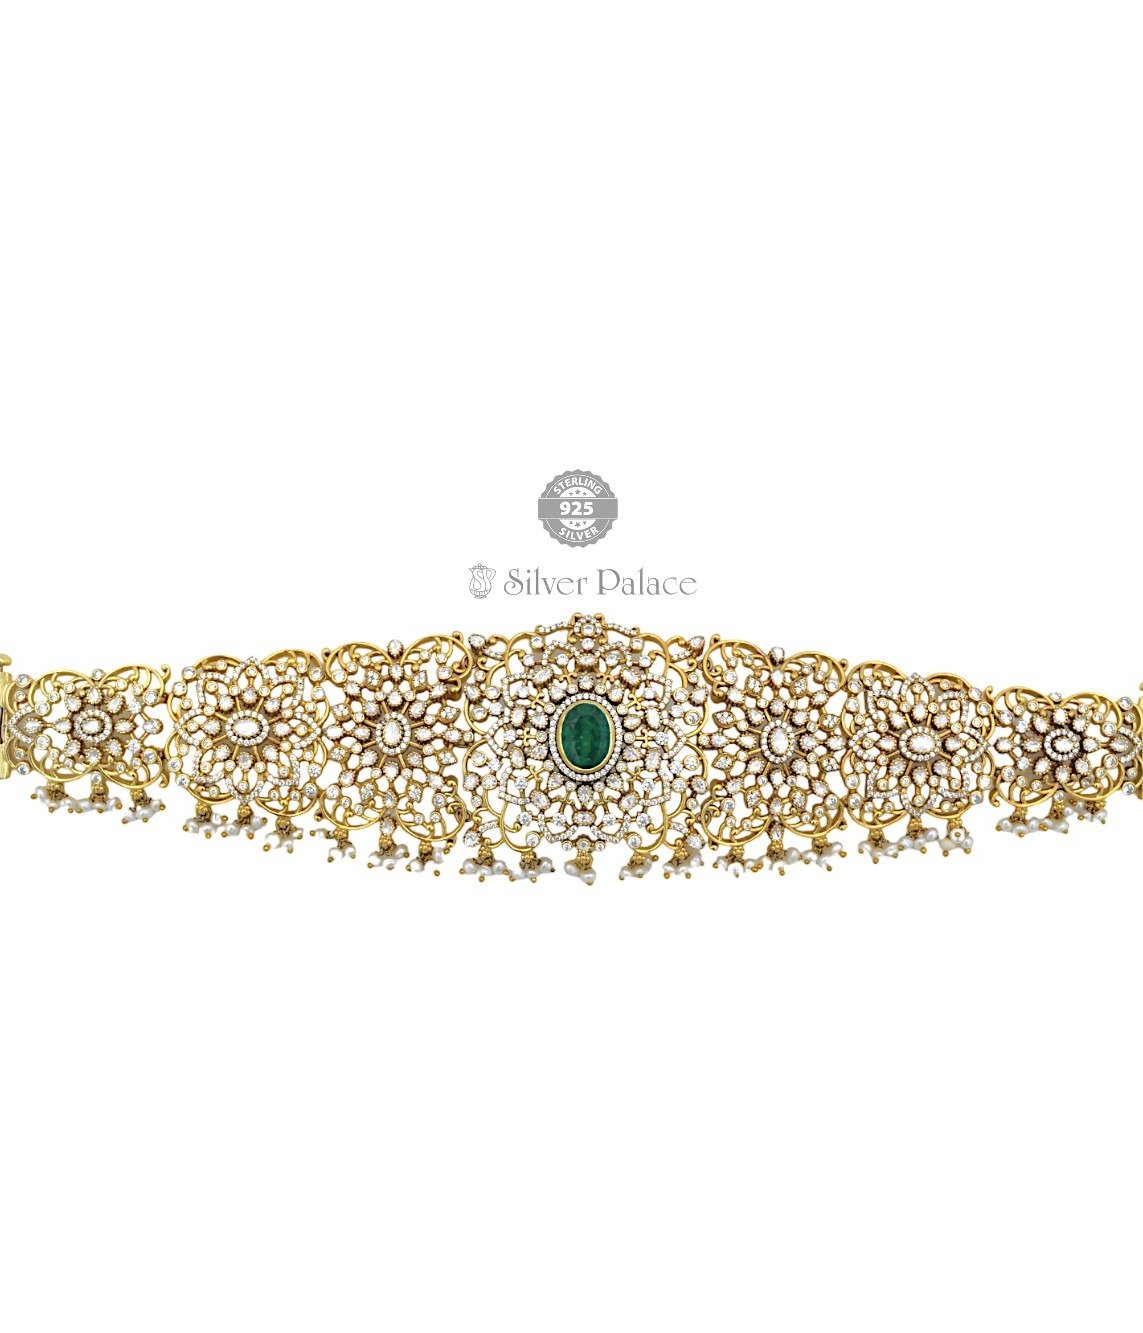 92.5 Silver With Gold Polish Two tone CZ Emerald White Pearl Waist Band for Womens